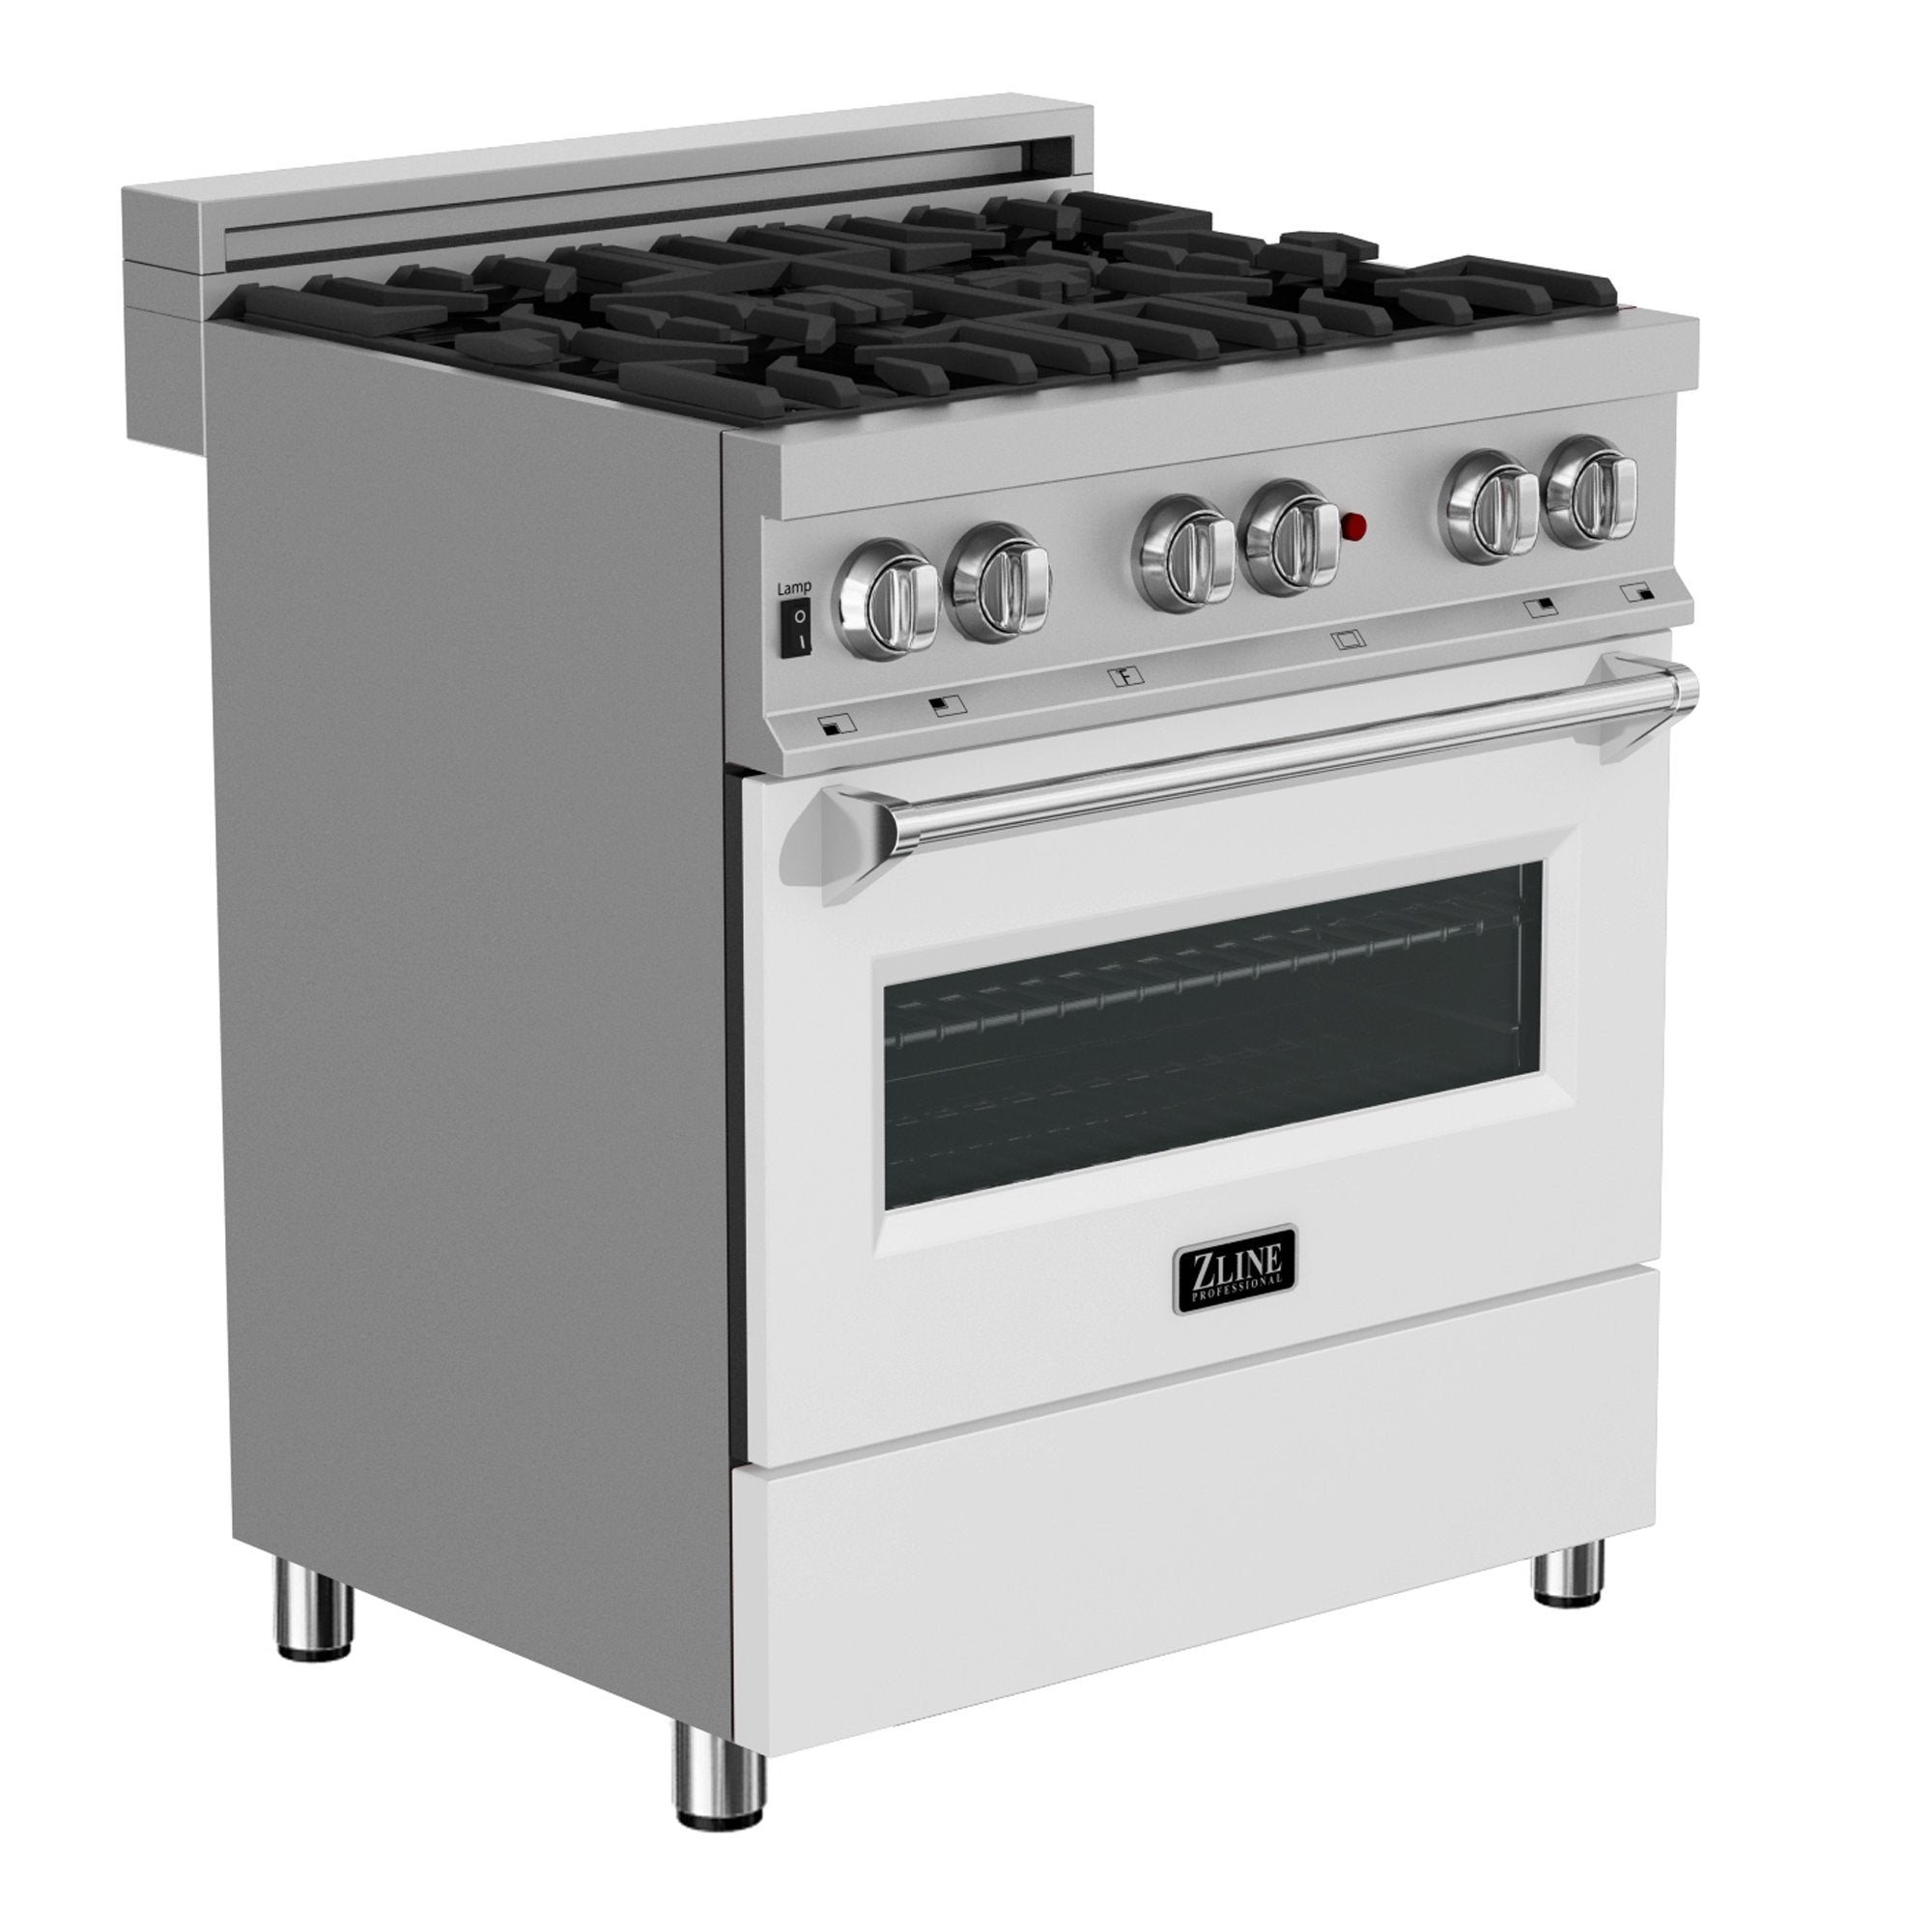 ZLINE 30" Professional Dual Fuel Range in DuraSnow Stainless Steel with Color Door Finishes - Ranges - ZLINE Kitchen and Bath -